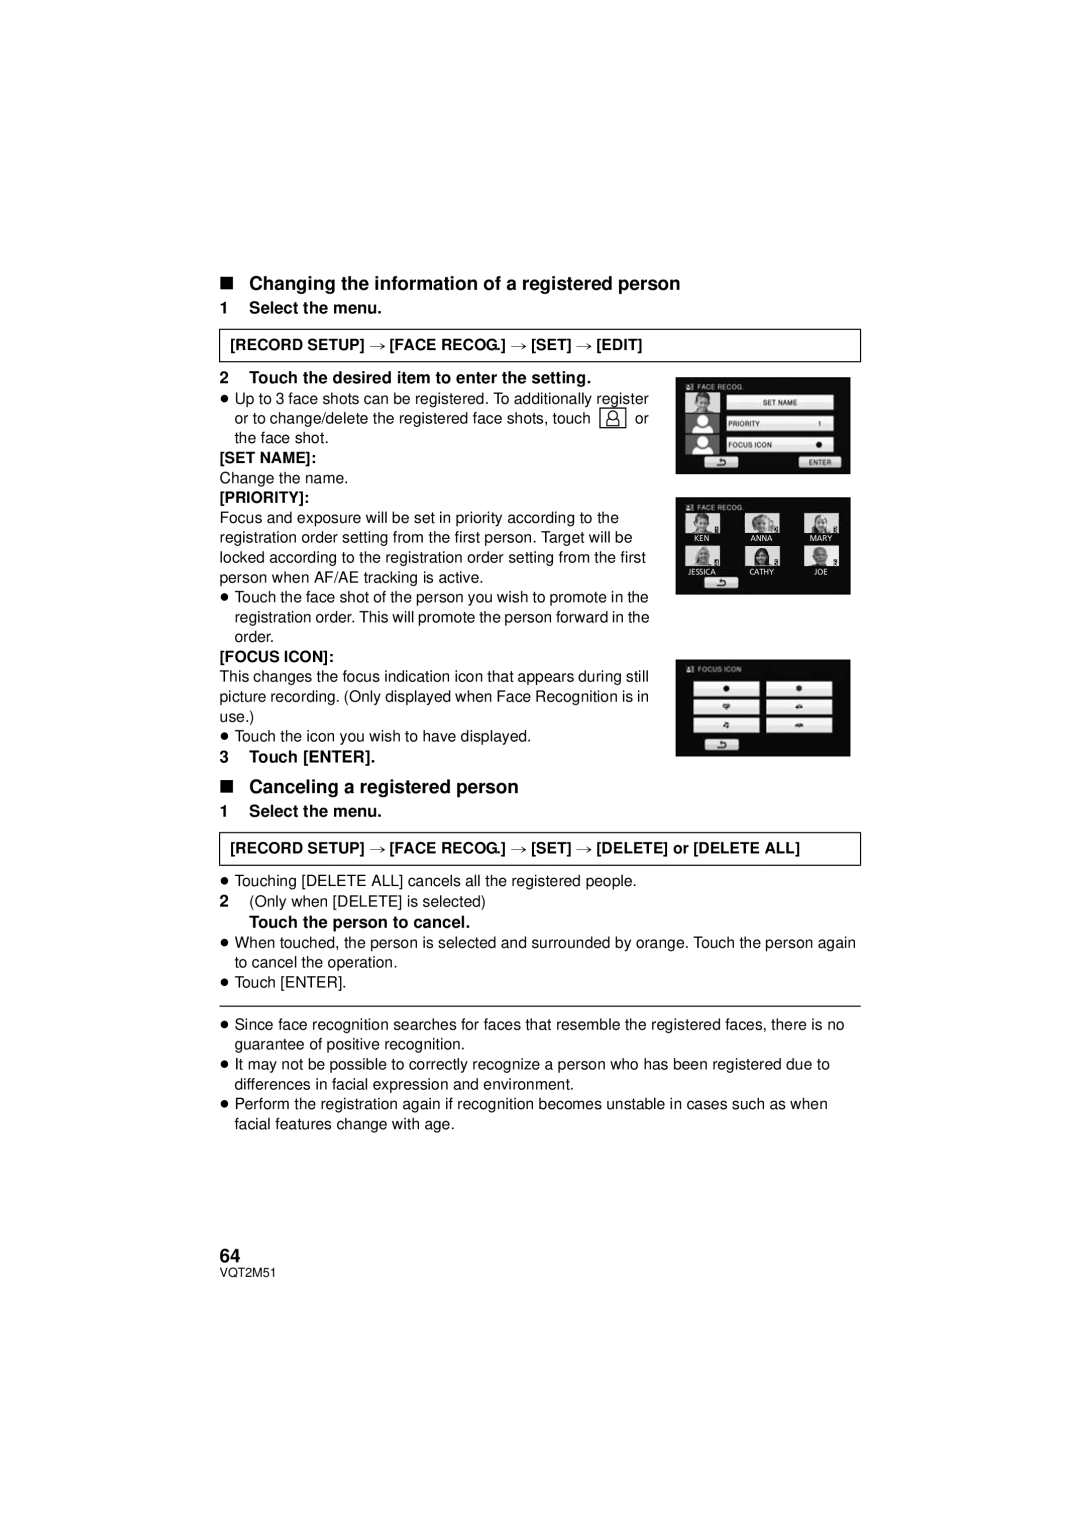 Panasonic HDC-SD60P/PC ∫ Changing the information of a registered person, ∫ Canceling a registered person, Select the menu 